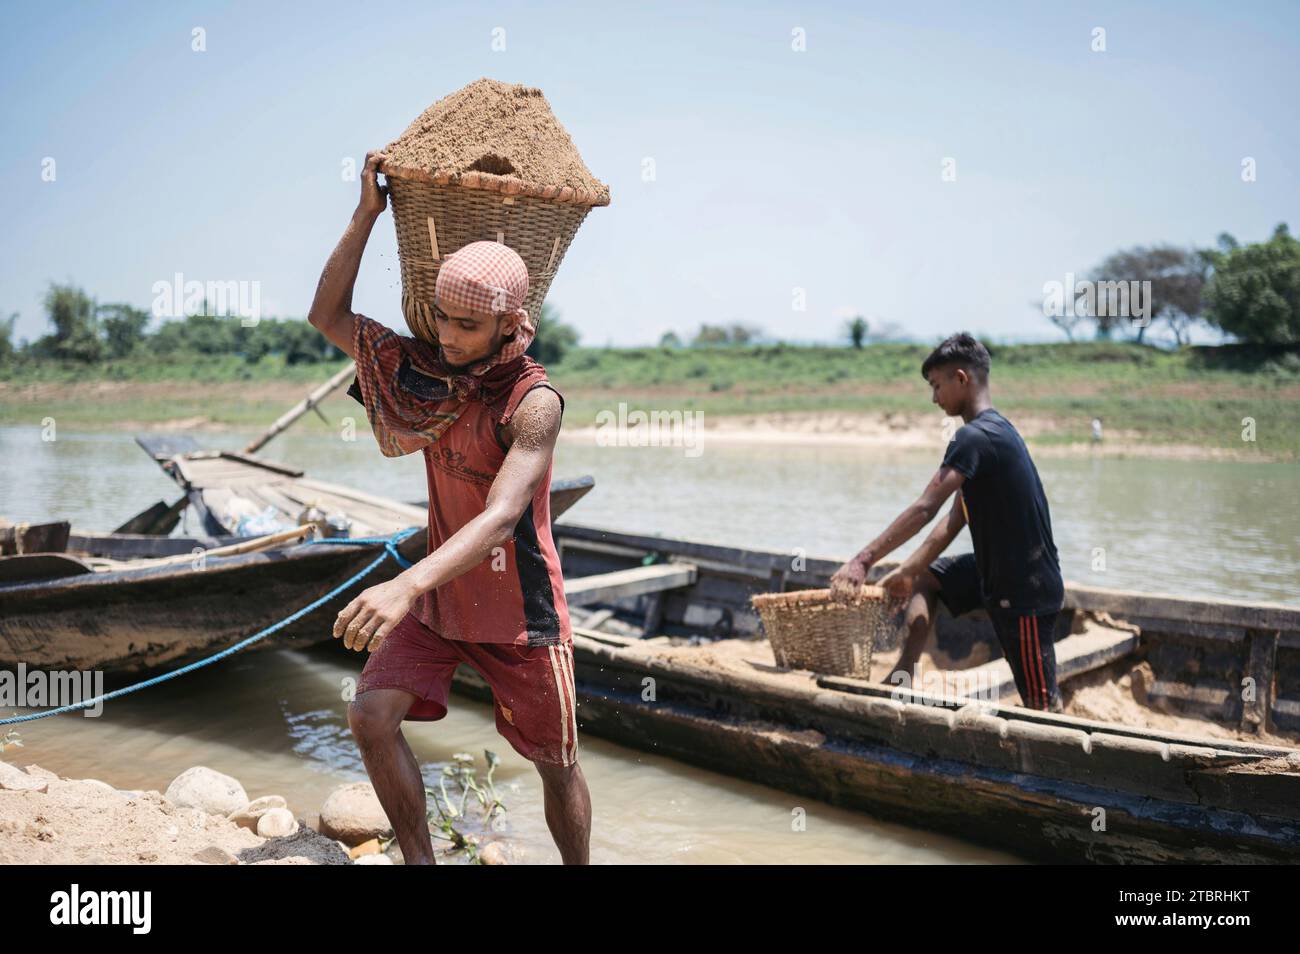 Men working at a high-quality sand collecting site, for the construction industry of the country. Lalakhal, near Jaflong, Sylhet Bangladesh Stock Photo